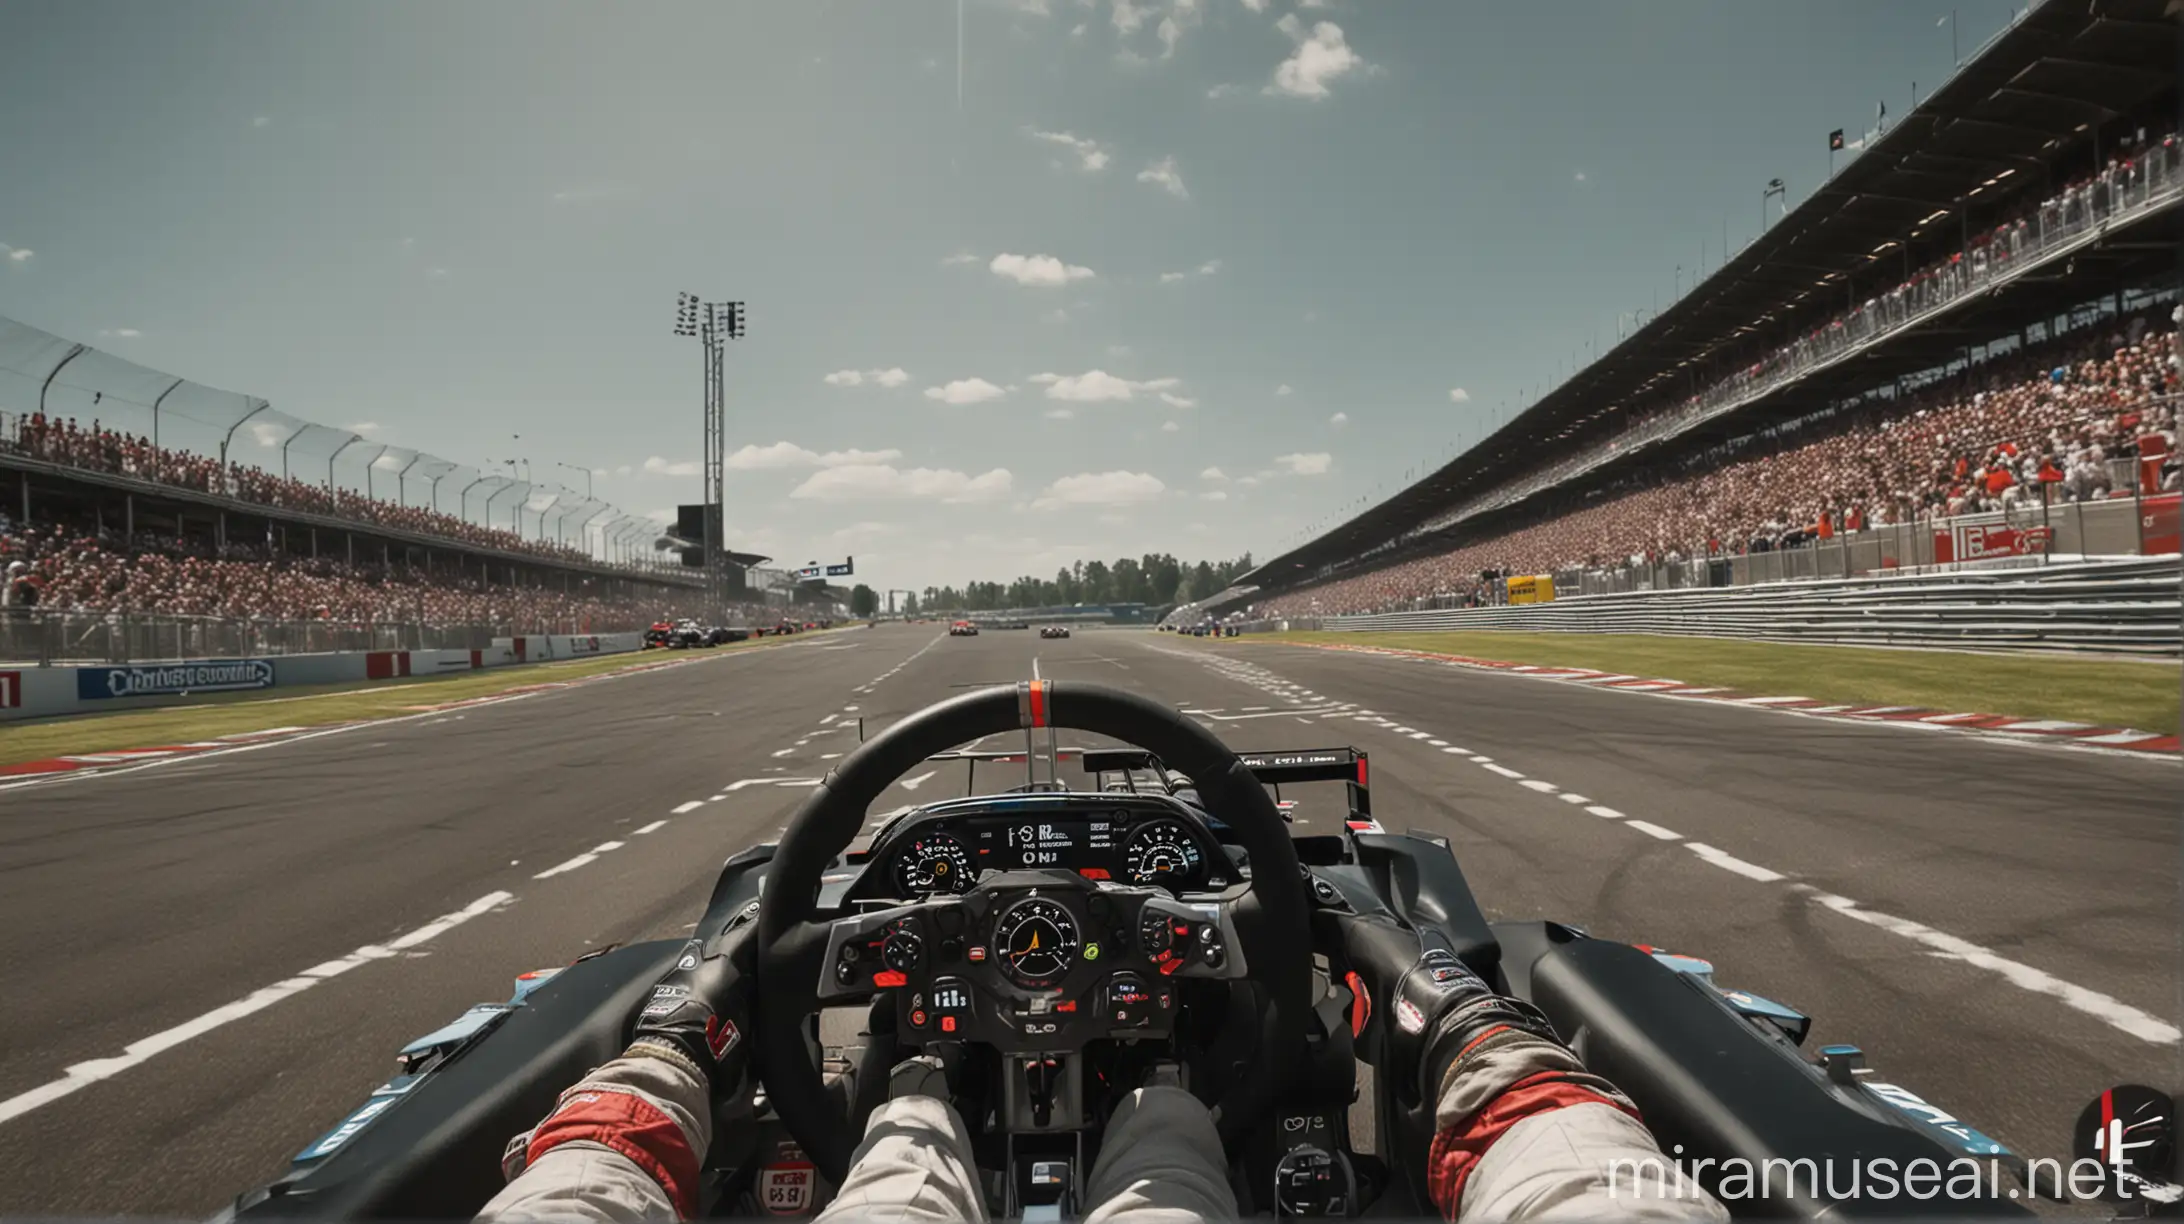 Create an image from the perspective of a Formula 1 driver during a race. The image should show the driver's hands gripping the steering wheel, the halo device around the cockpit, and the surrounding track environment. The steering wheel should have various buttons and displays visible. The halo should partially frame the view, giving a realistic sense of the driver's field of vision. The track ahead should be dynamic, possibly showing a curve, other racing cars, or race track barriers. The surroundings should include elements like grandstands with spectators, pit buildings, and advertisement banners typical of an F1 race. The overall atmosphere should convey speed, focus, and the intensity of a high-speed race.